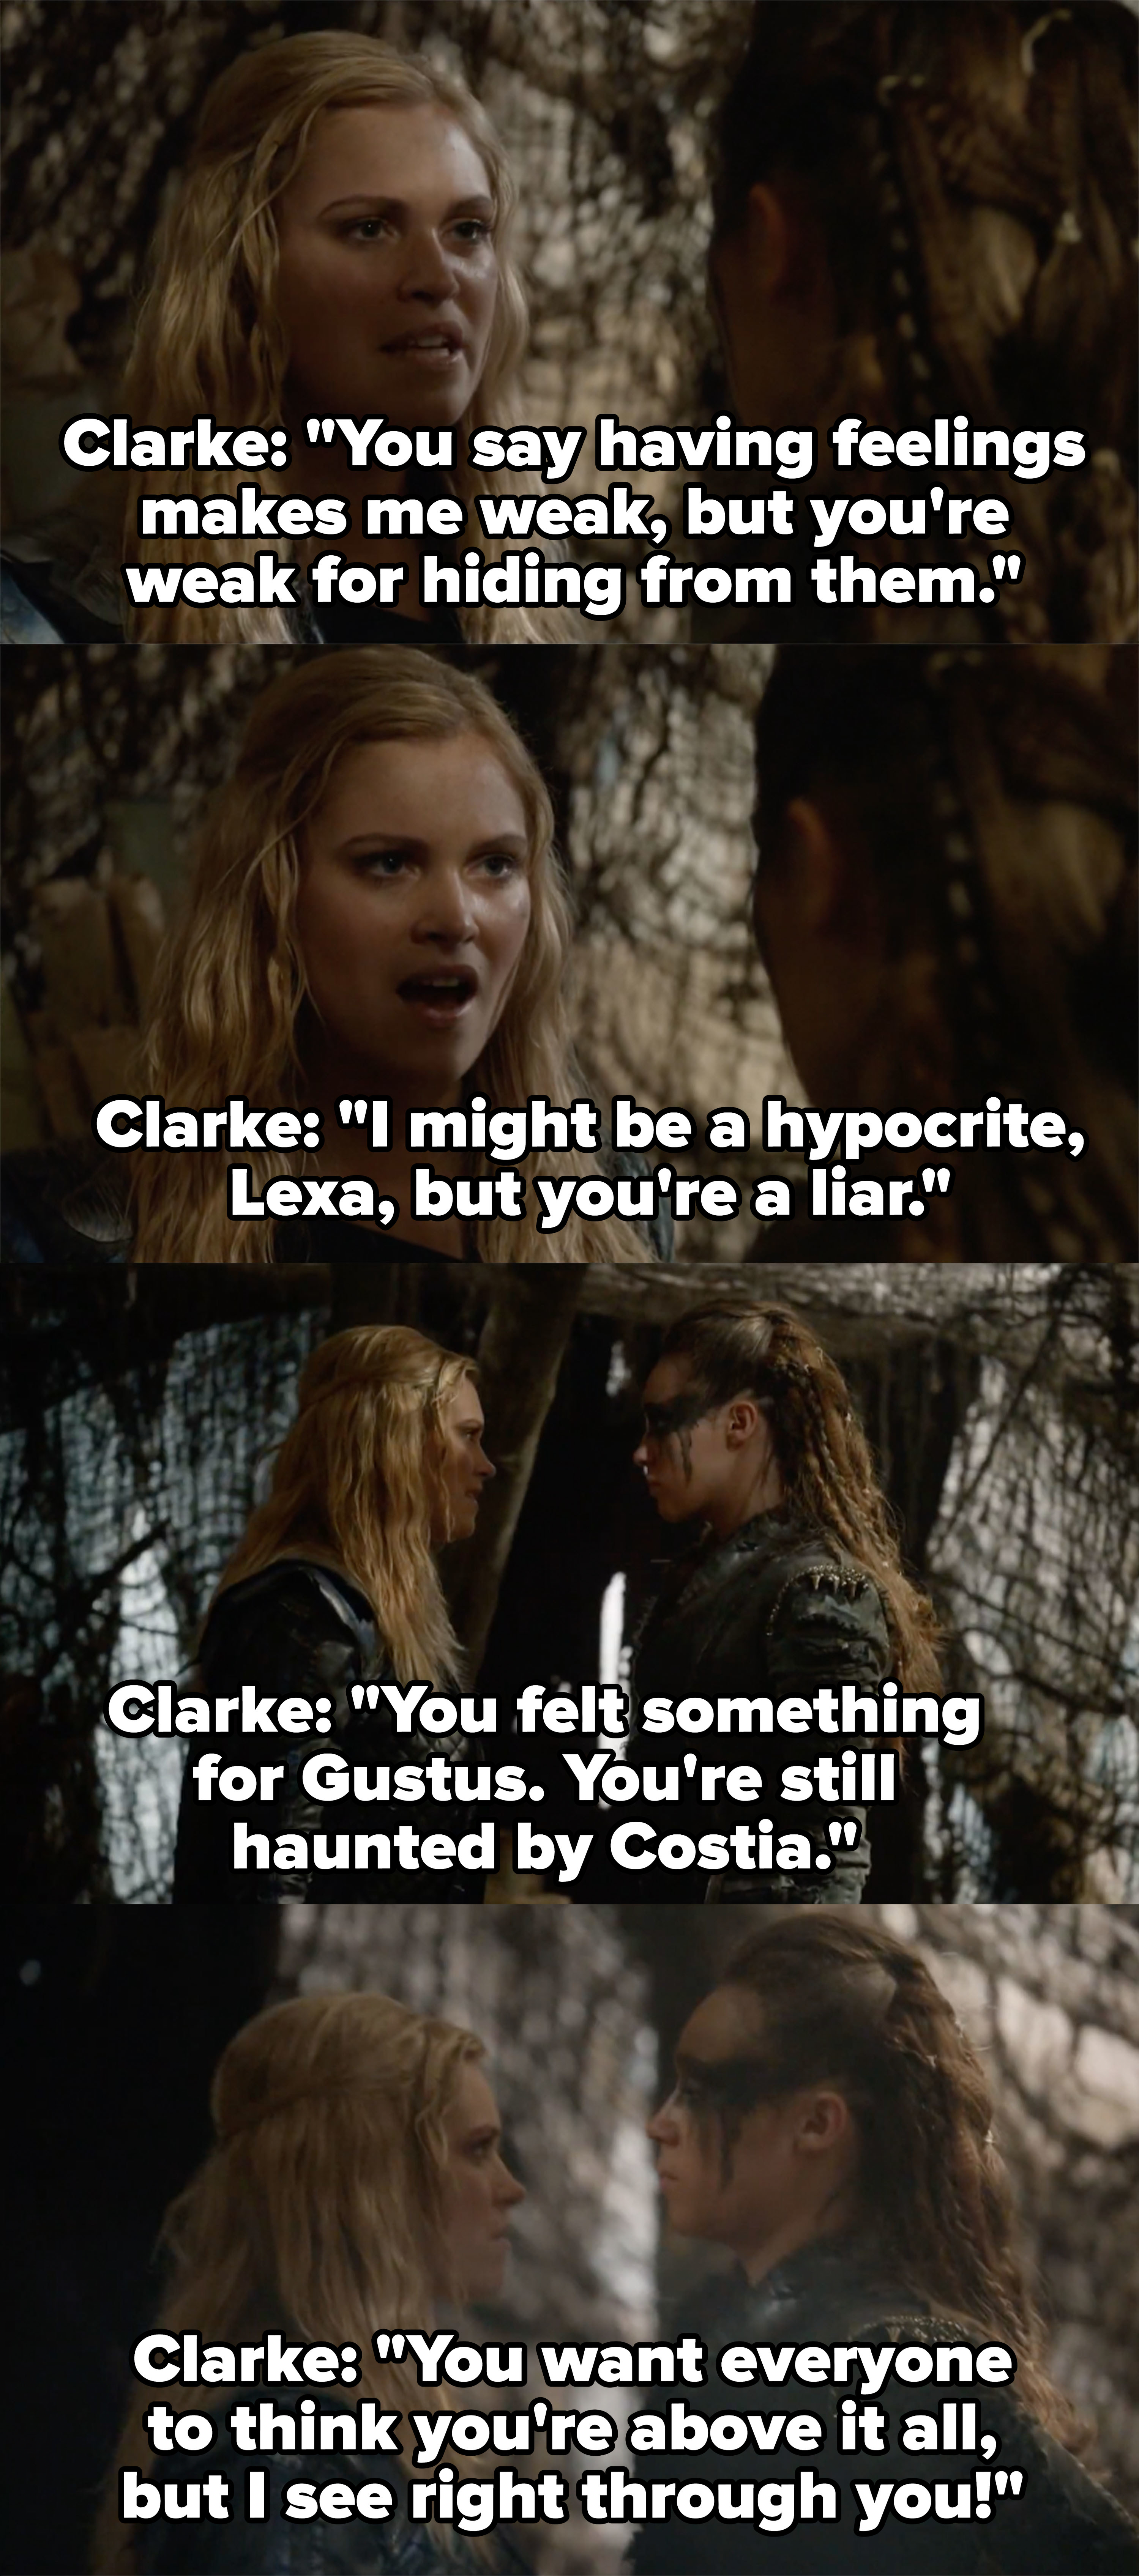 Clarke calls Lexa a liar for saying that feelings make you weak and says she sees right through her